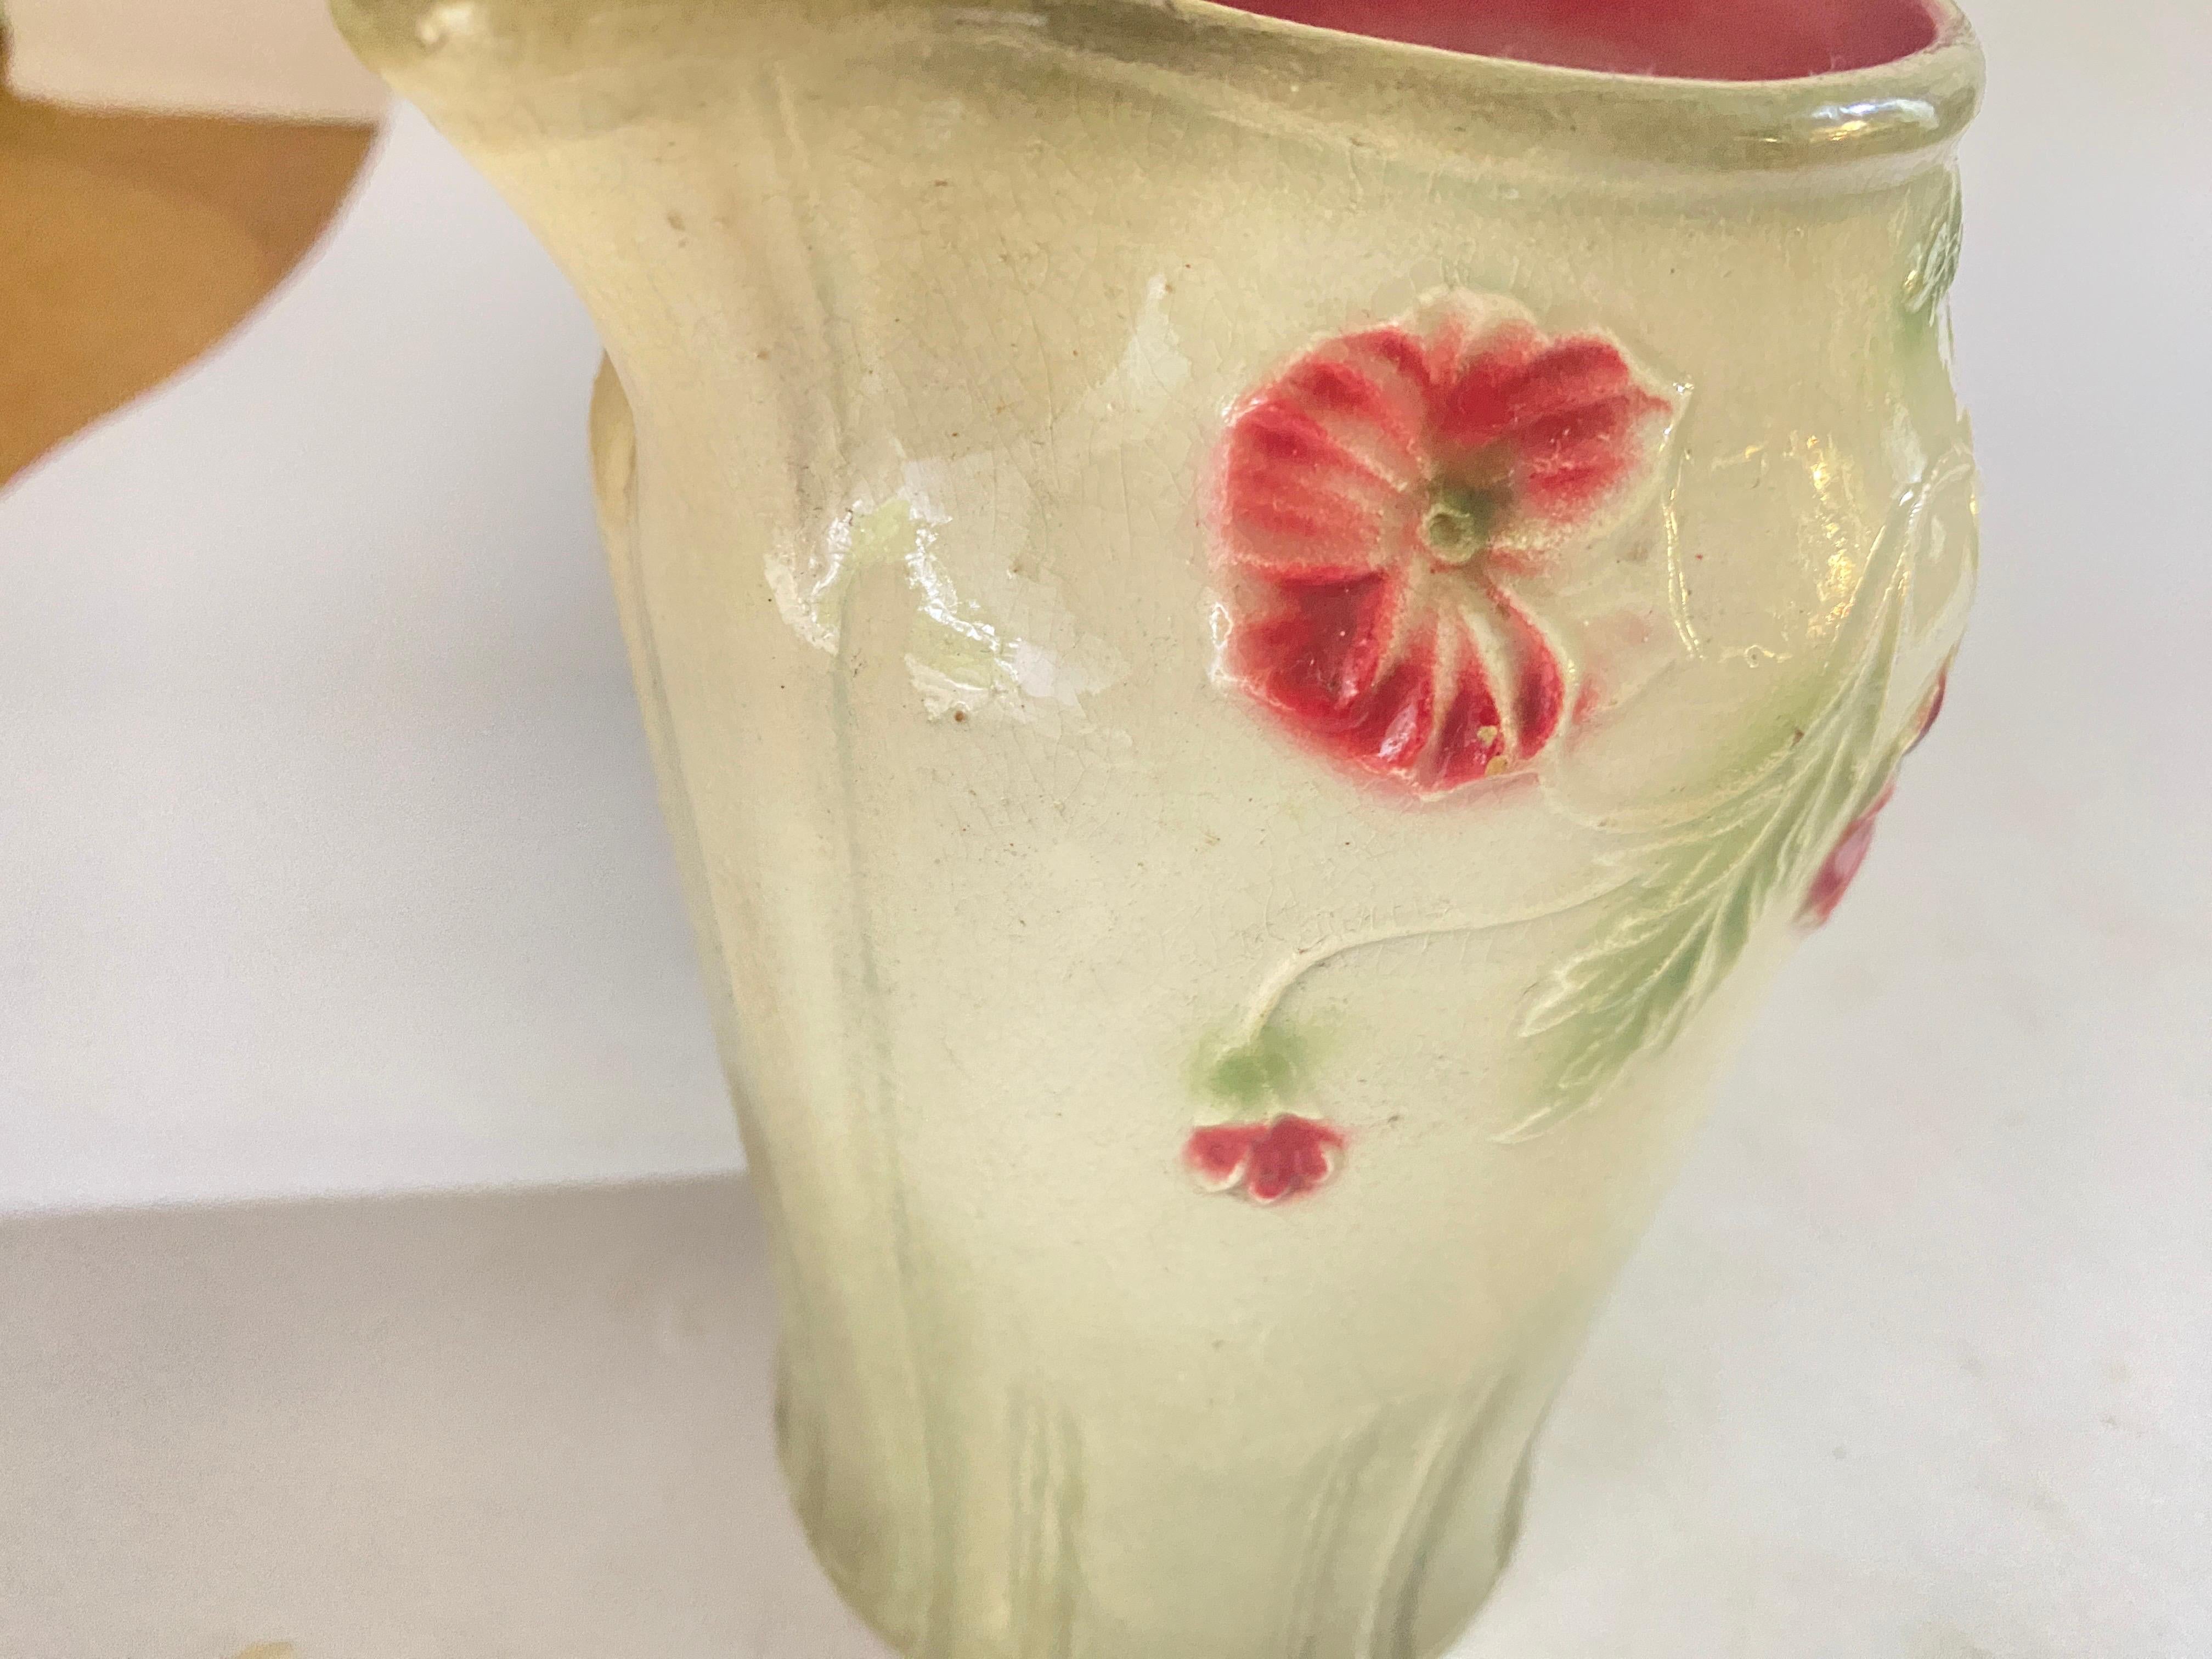 Water lily pitcher. Designed with large green leaves, water lily flowers. The top neck with handle circa 1900.
Brown Yellow and Green colors made in France.